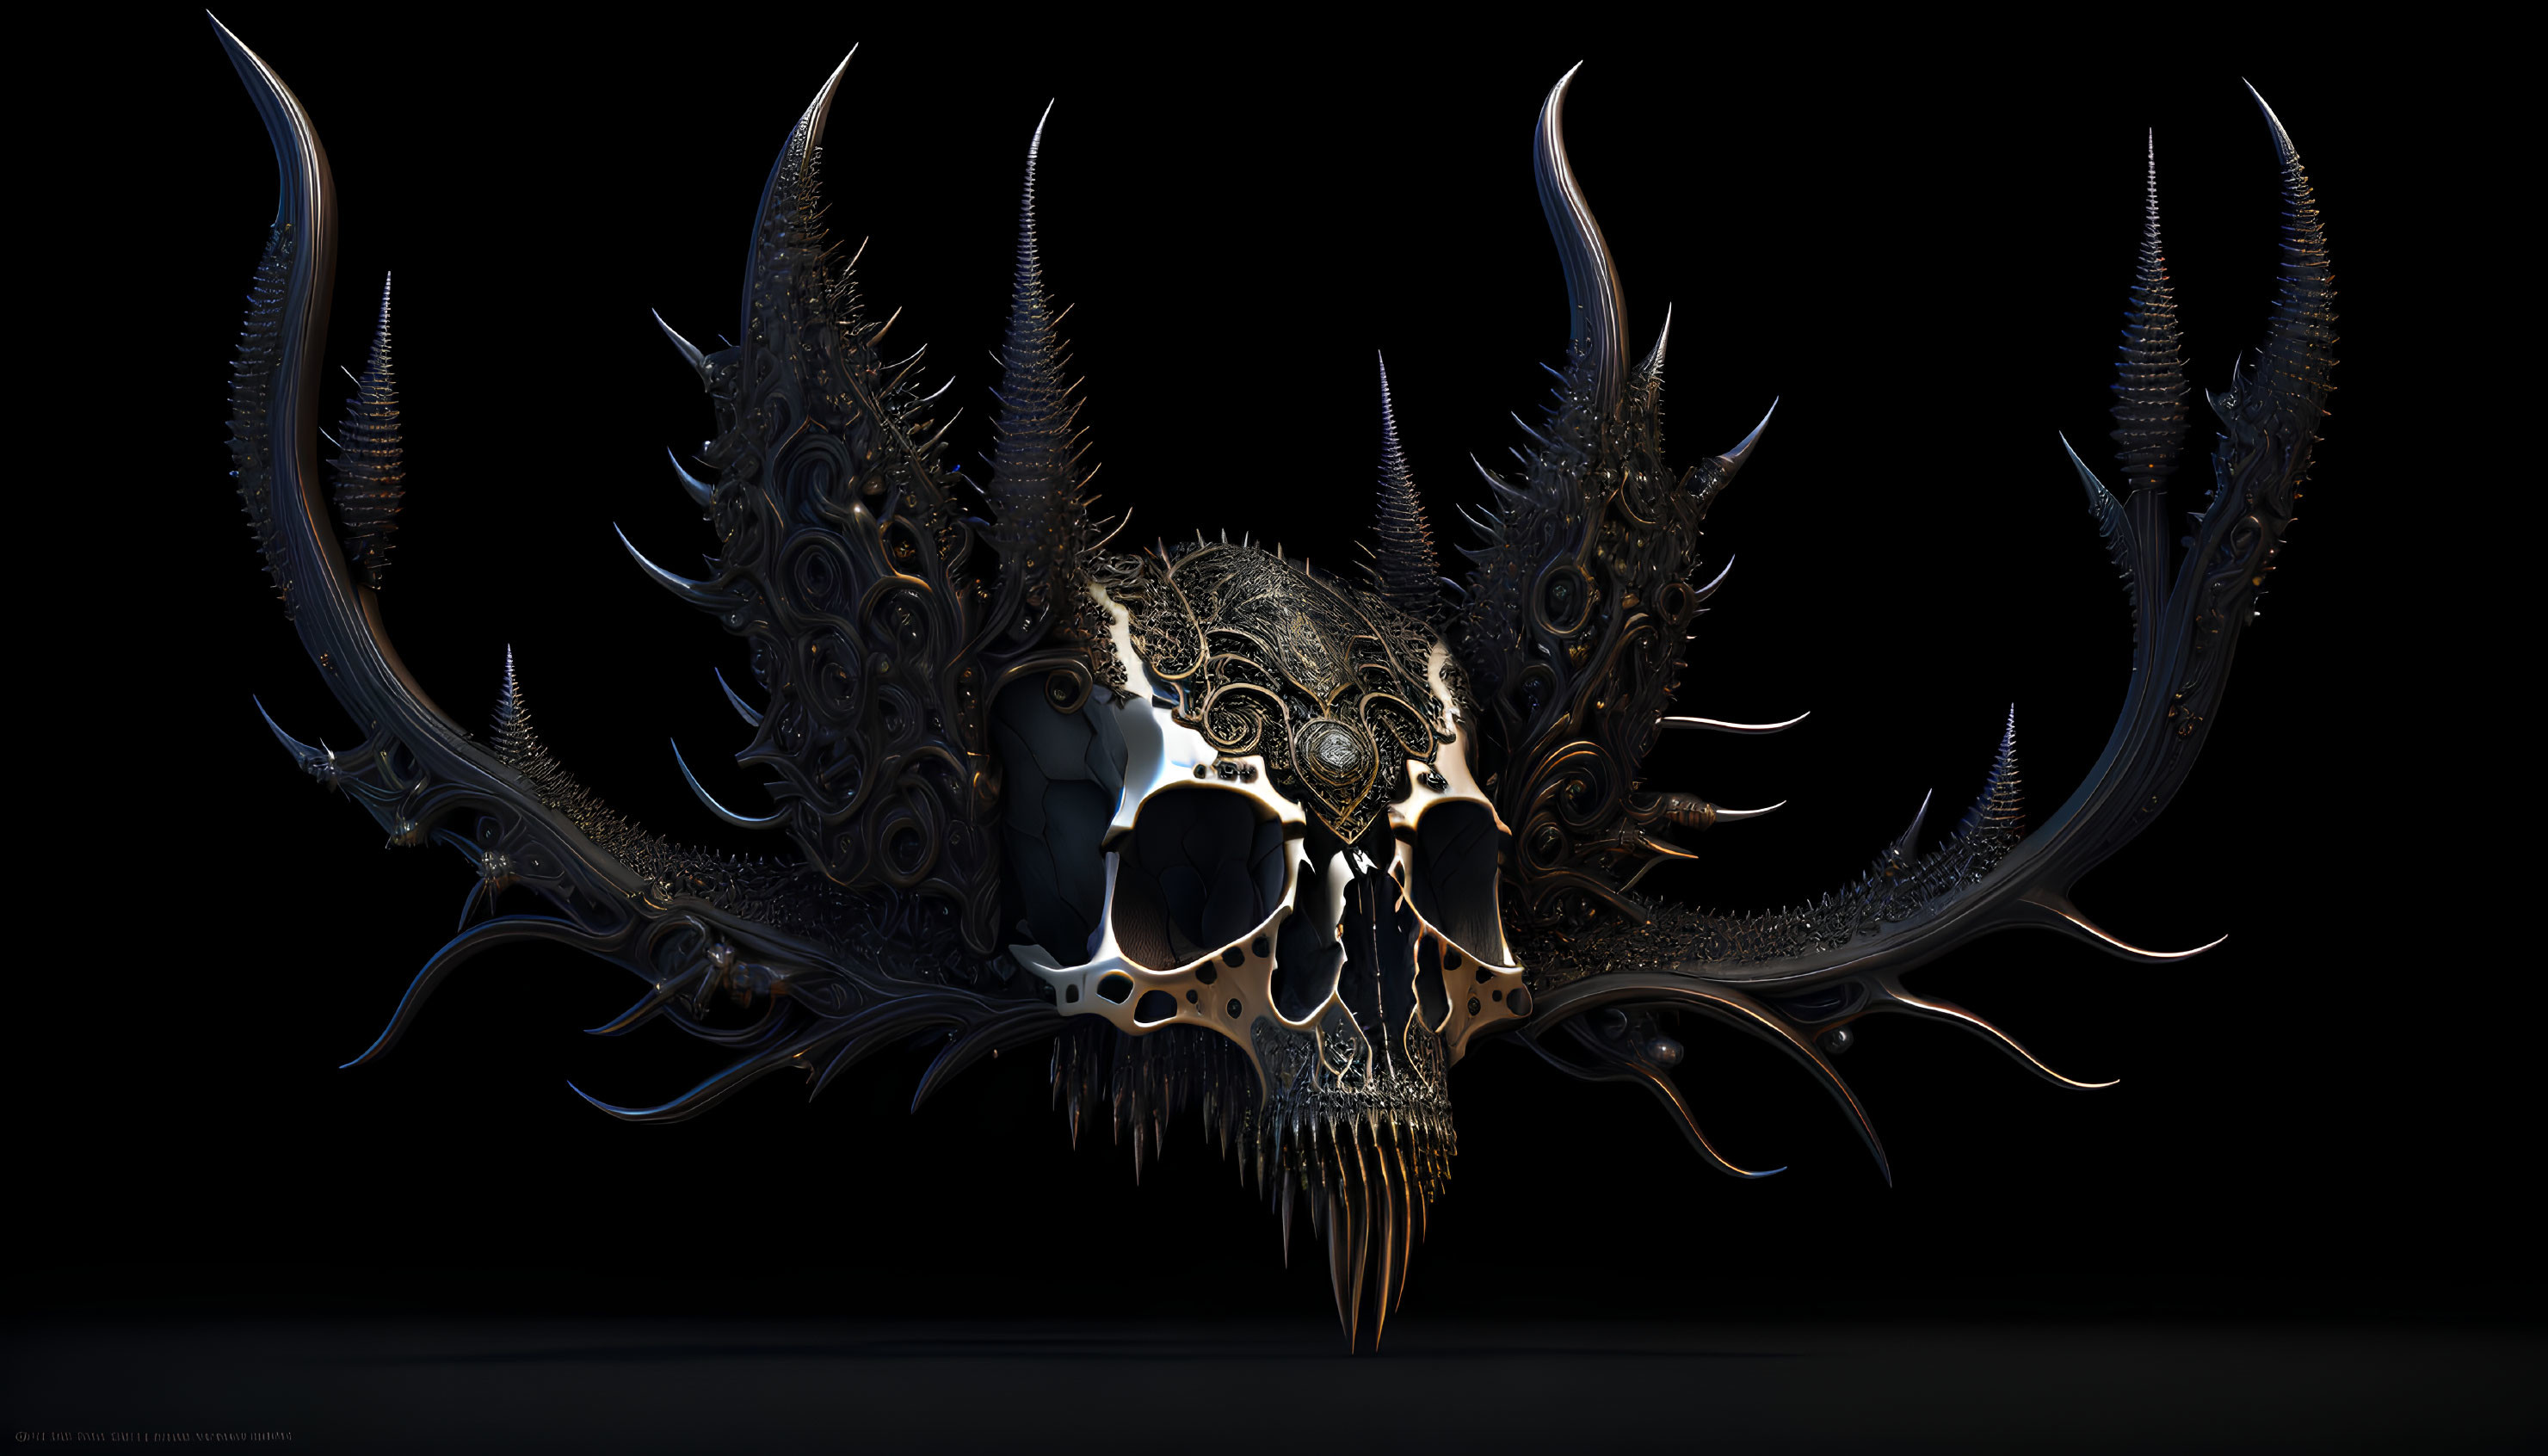 Intricate metallic skull with ornate horns and filigree detailing